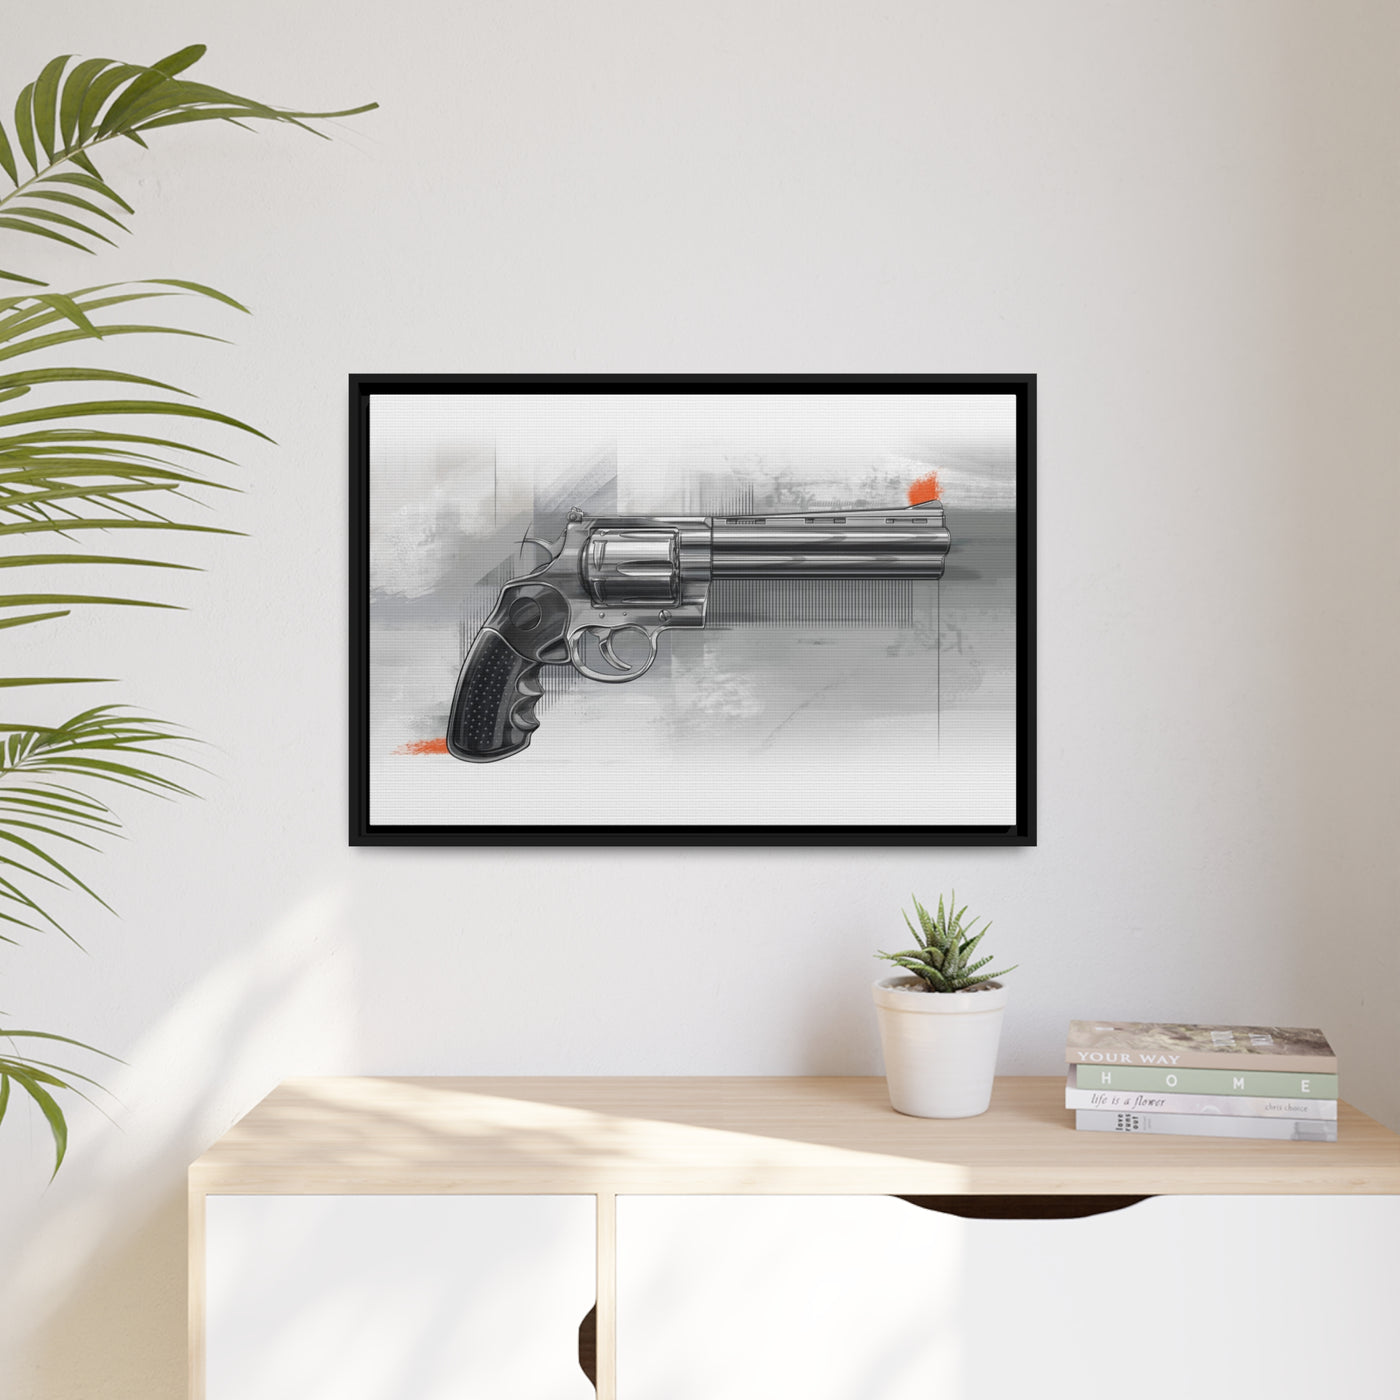 Stainless .44 Mag Revolver Painting - Black Framed Wrapped Canvas - Value Collection